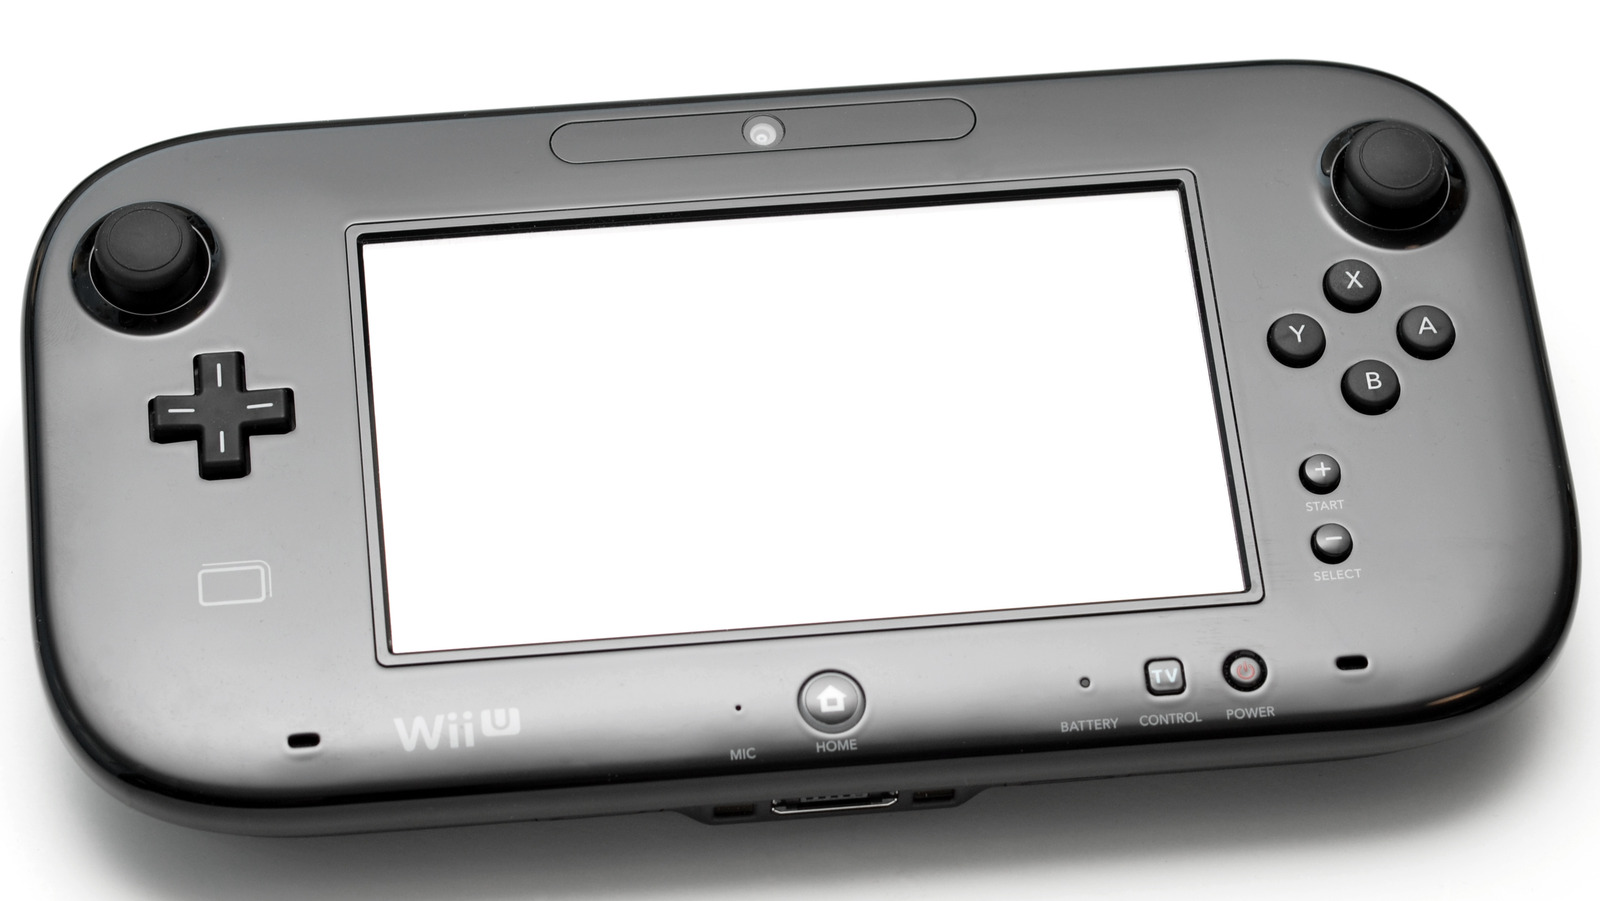 Can the nintendo wii u still connect to the internet?. My console